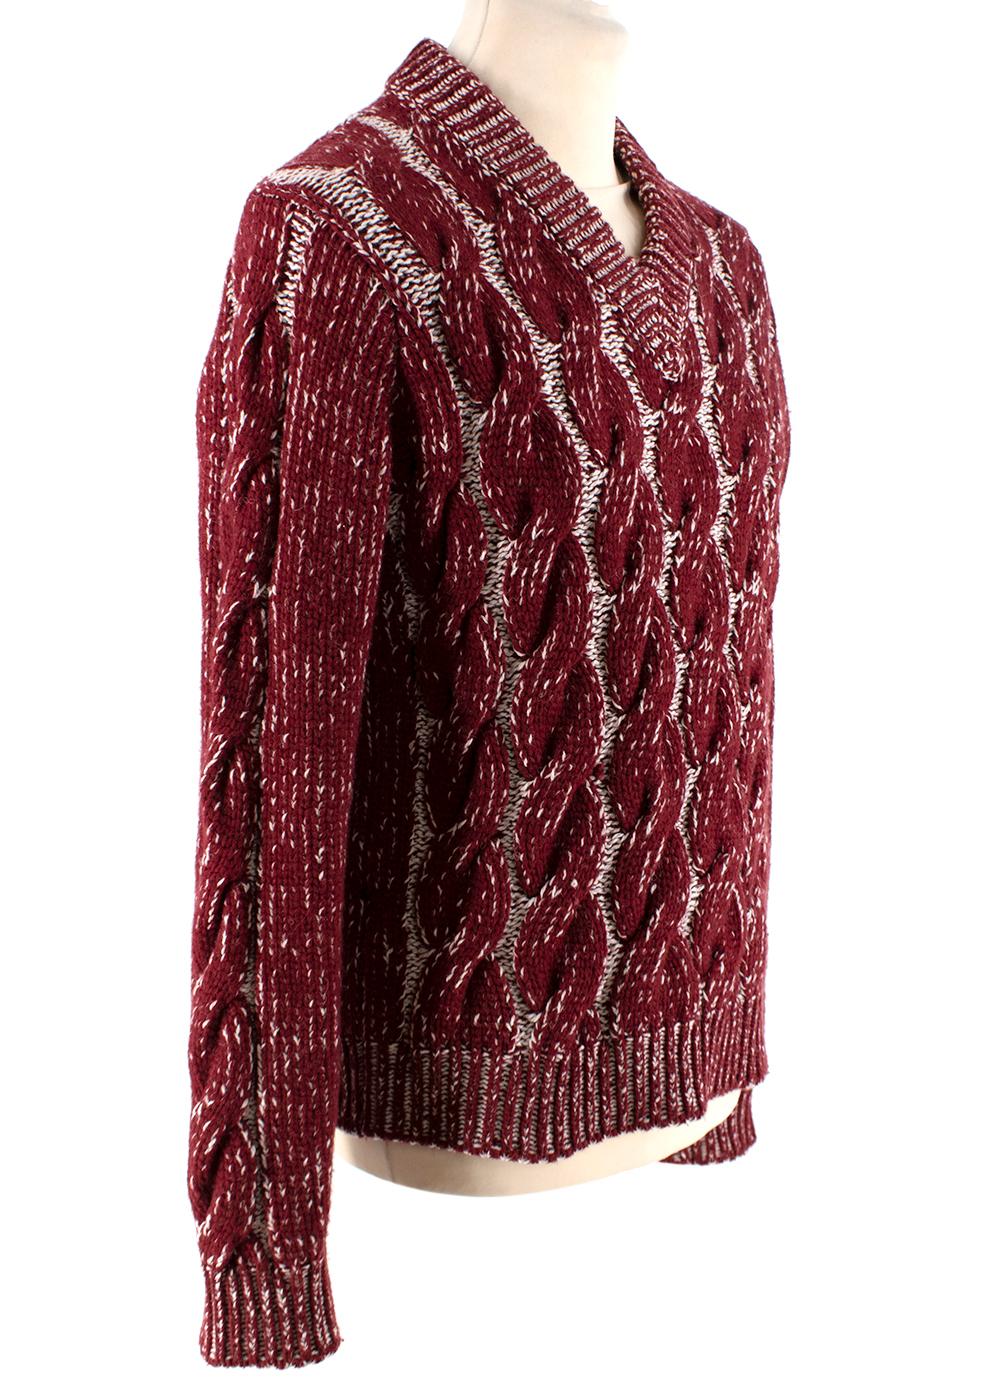 Marni Burgundy & Ivory Cable Knit V-Neck Jumper

- Burgundy & ivory melange knit, with an intarsia cable knit pattern
- Ribbed v-neck collar, cuffs and hem

Materials 
73% Wool 
27% Polyamide 

Made in Italy
Dry Clean Only 
9.5/10 Excellent